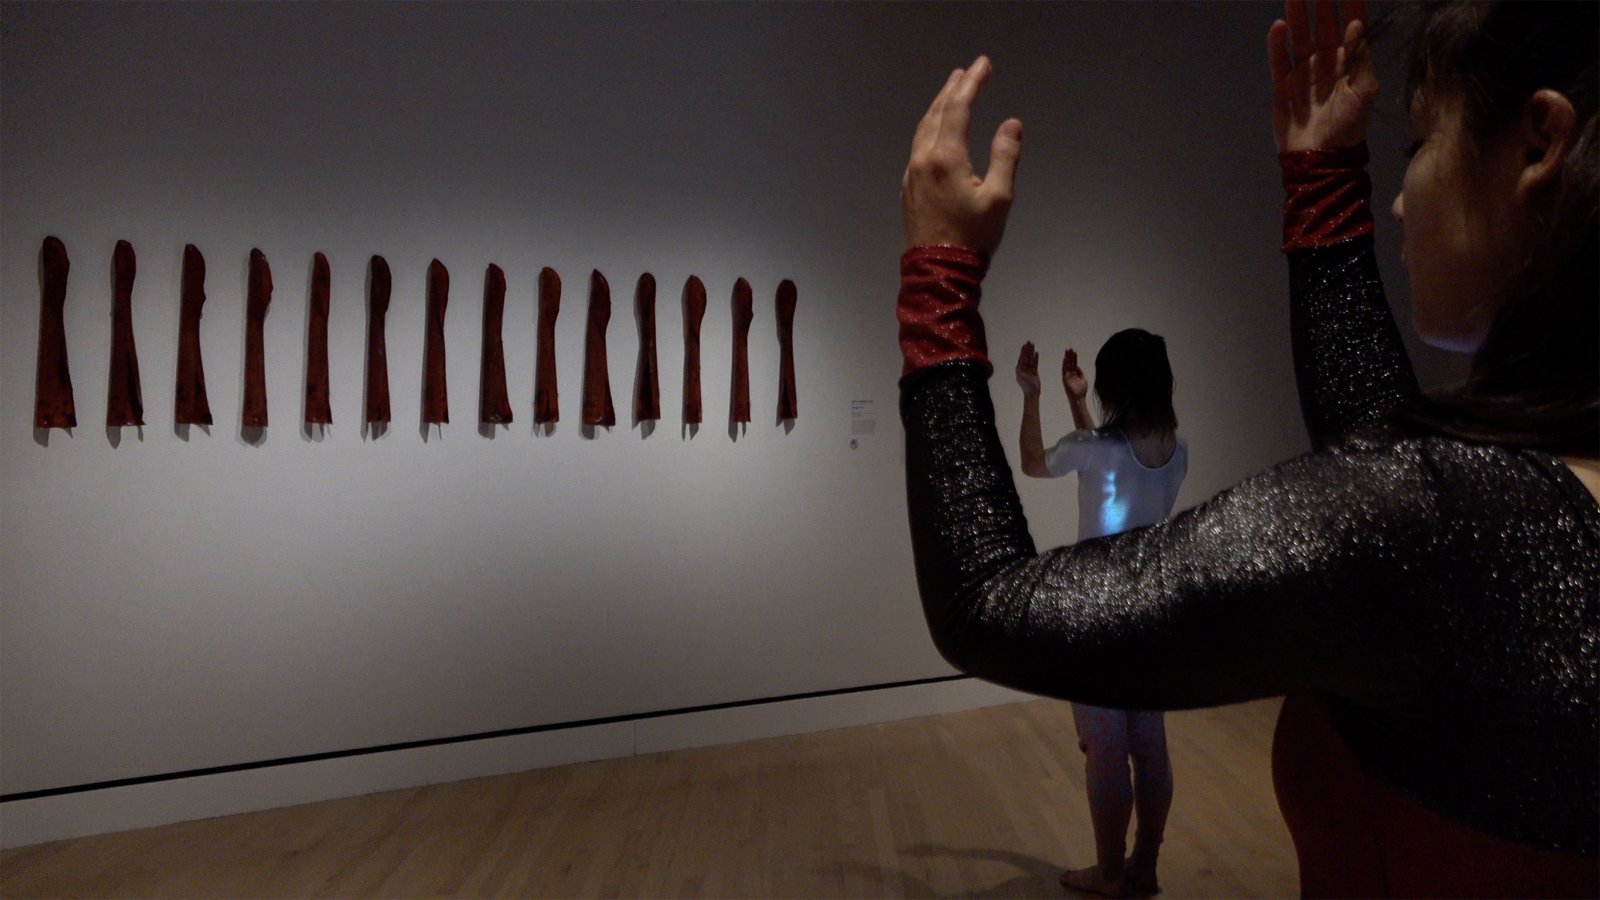 Tanya Lukin Linklater, Untitled (for Sonya Kelliher-Combs), 2018, site-specific performance, plinth, dimensions variable. Performance documentation, Art for a New Understanding, Native Art 1950s to Now, Crystal Bridges Museum of American Art, Bentonville, USA, 2018